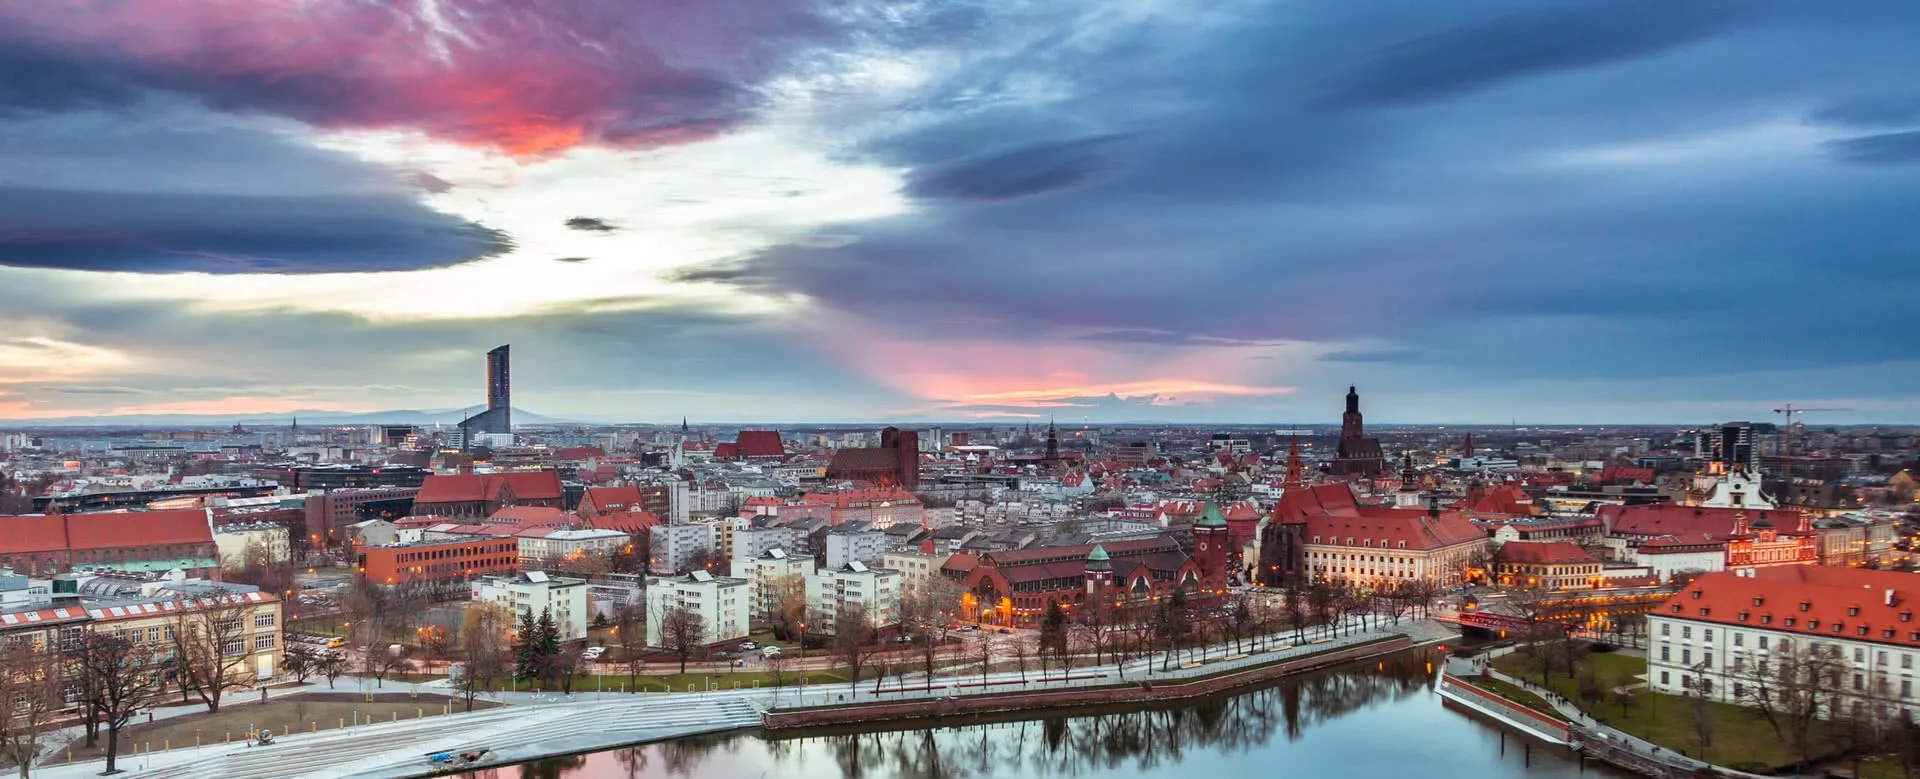 Wroclaw - the destination for school trips